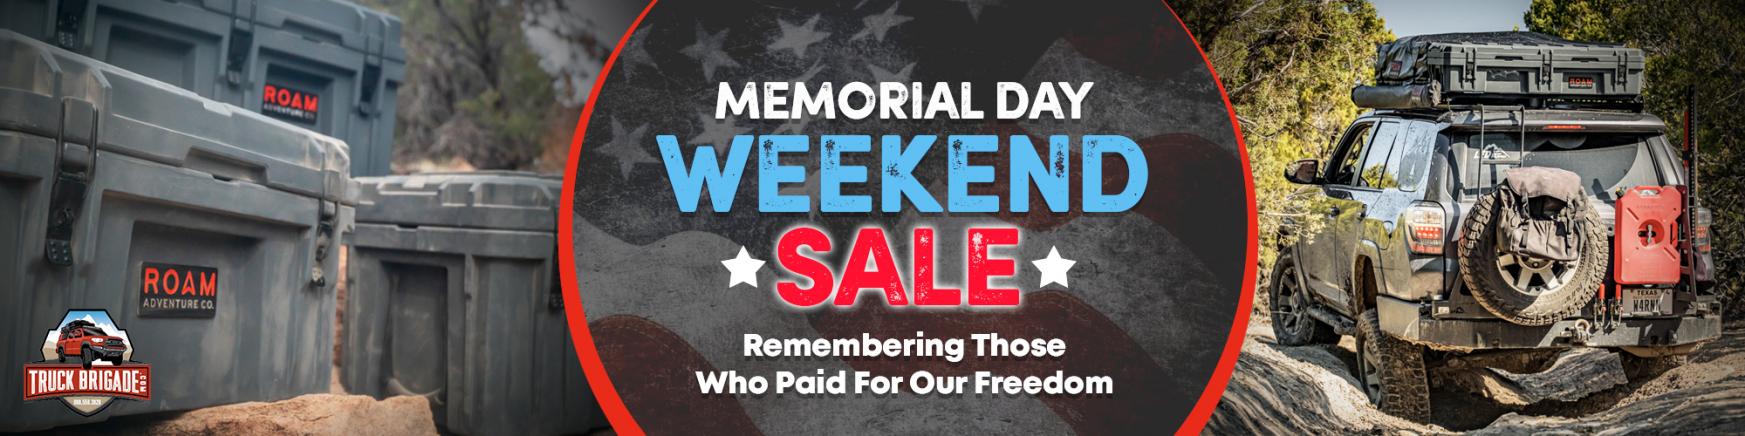 Memorial Day Sale-memorial-day-home-page-banner-jpg